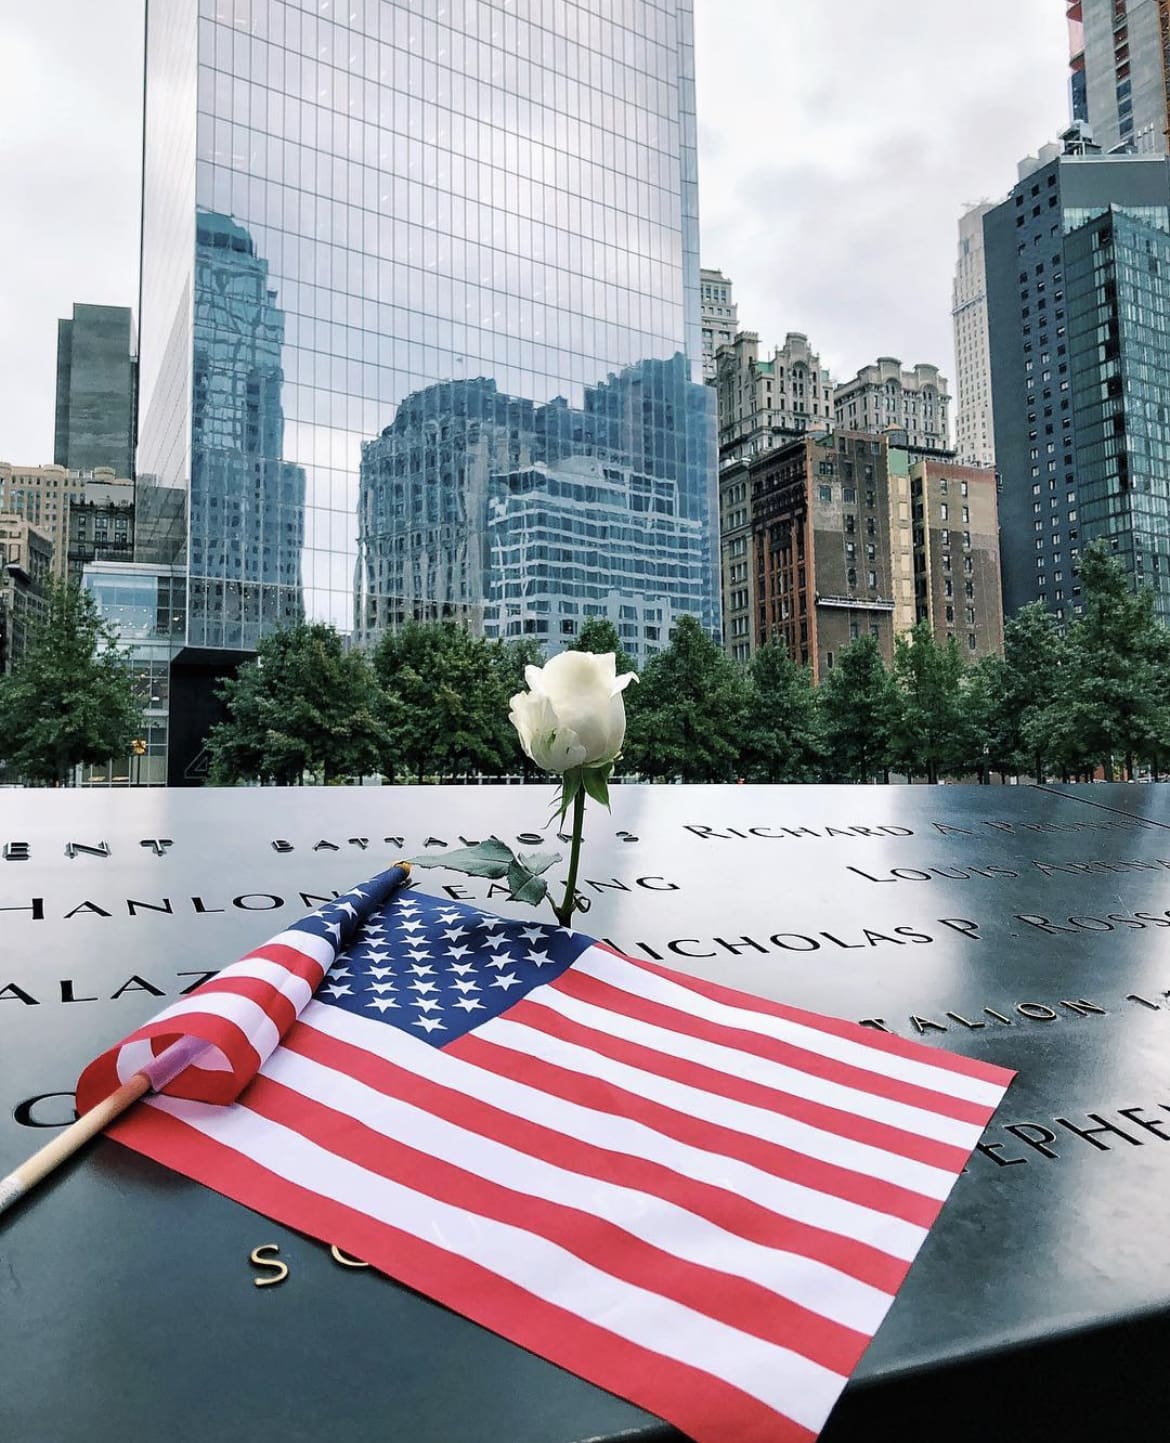 911 Memorial - How To Spend a Weekend In New York